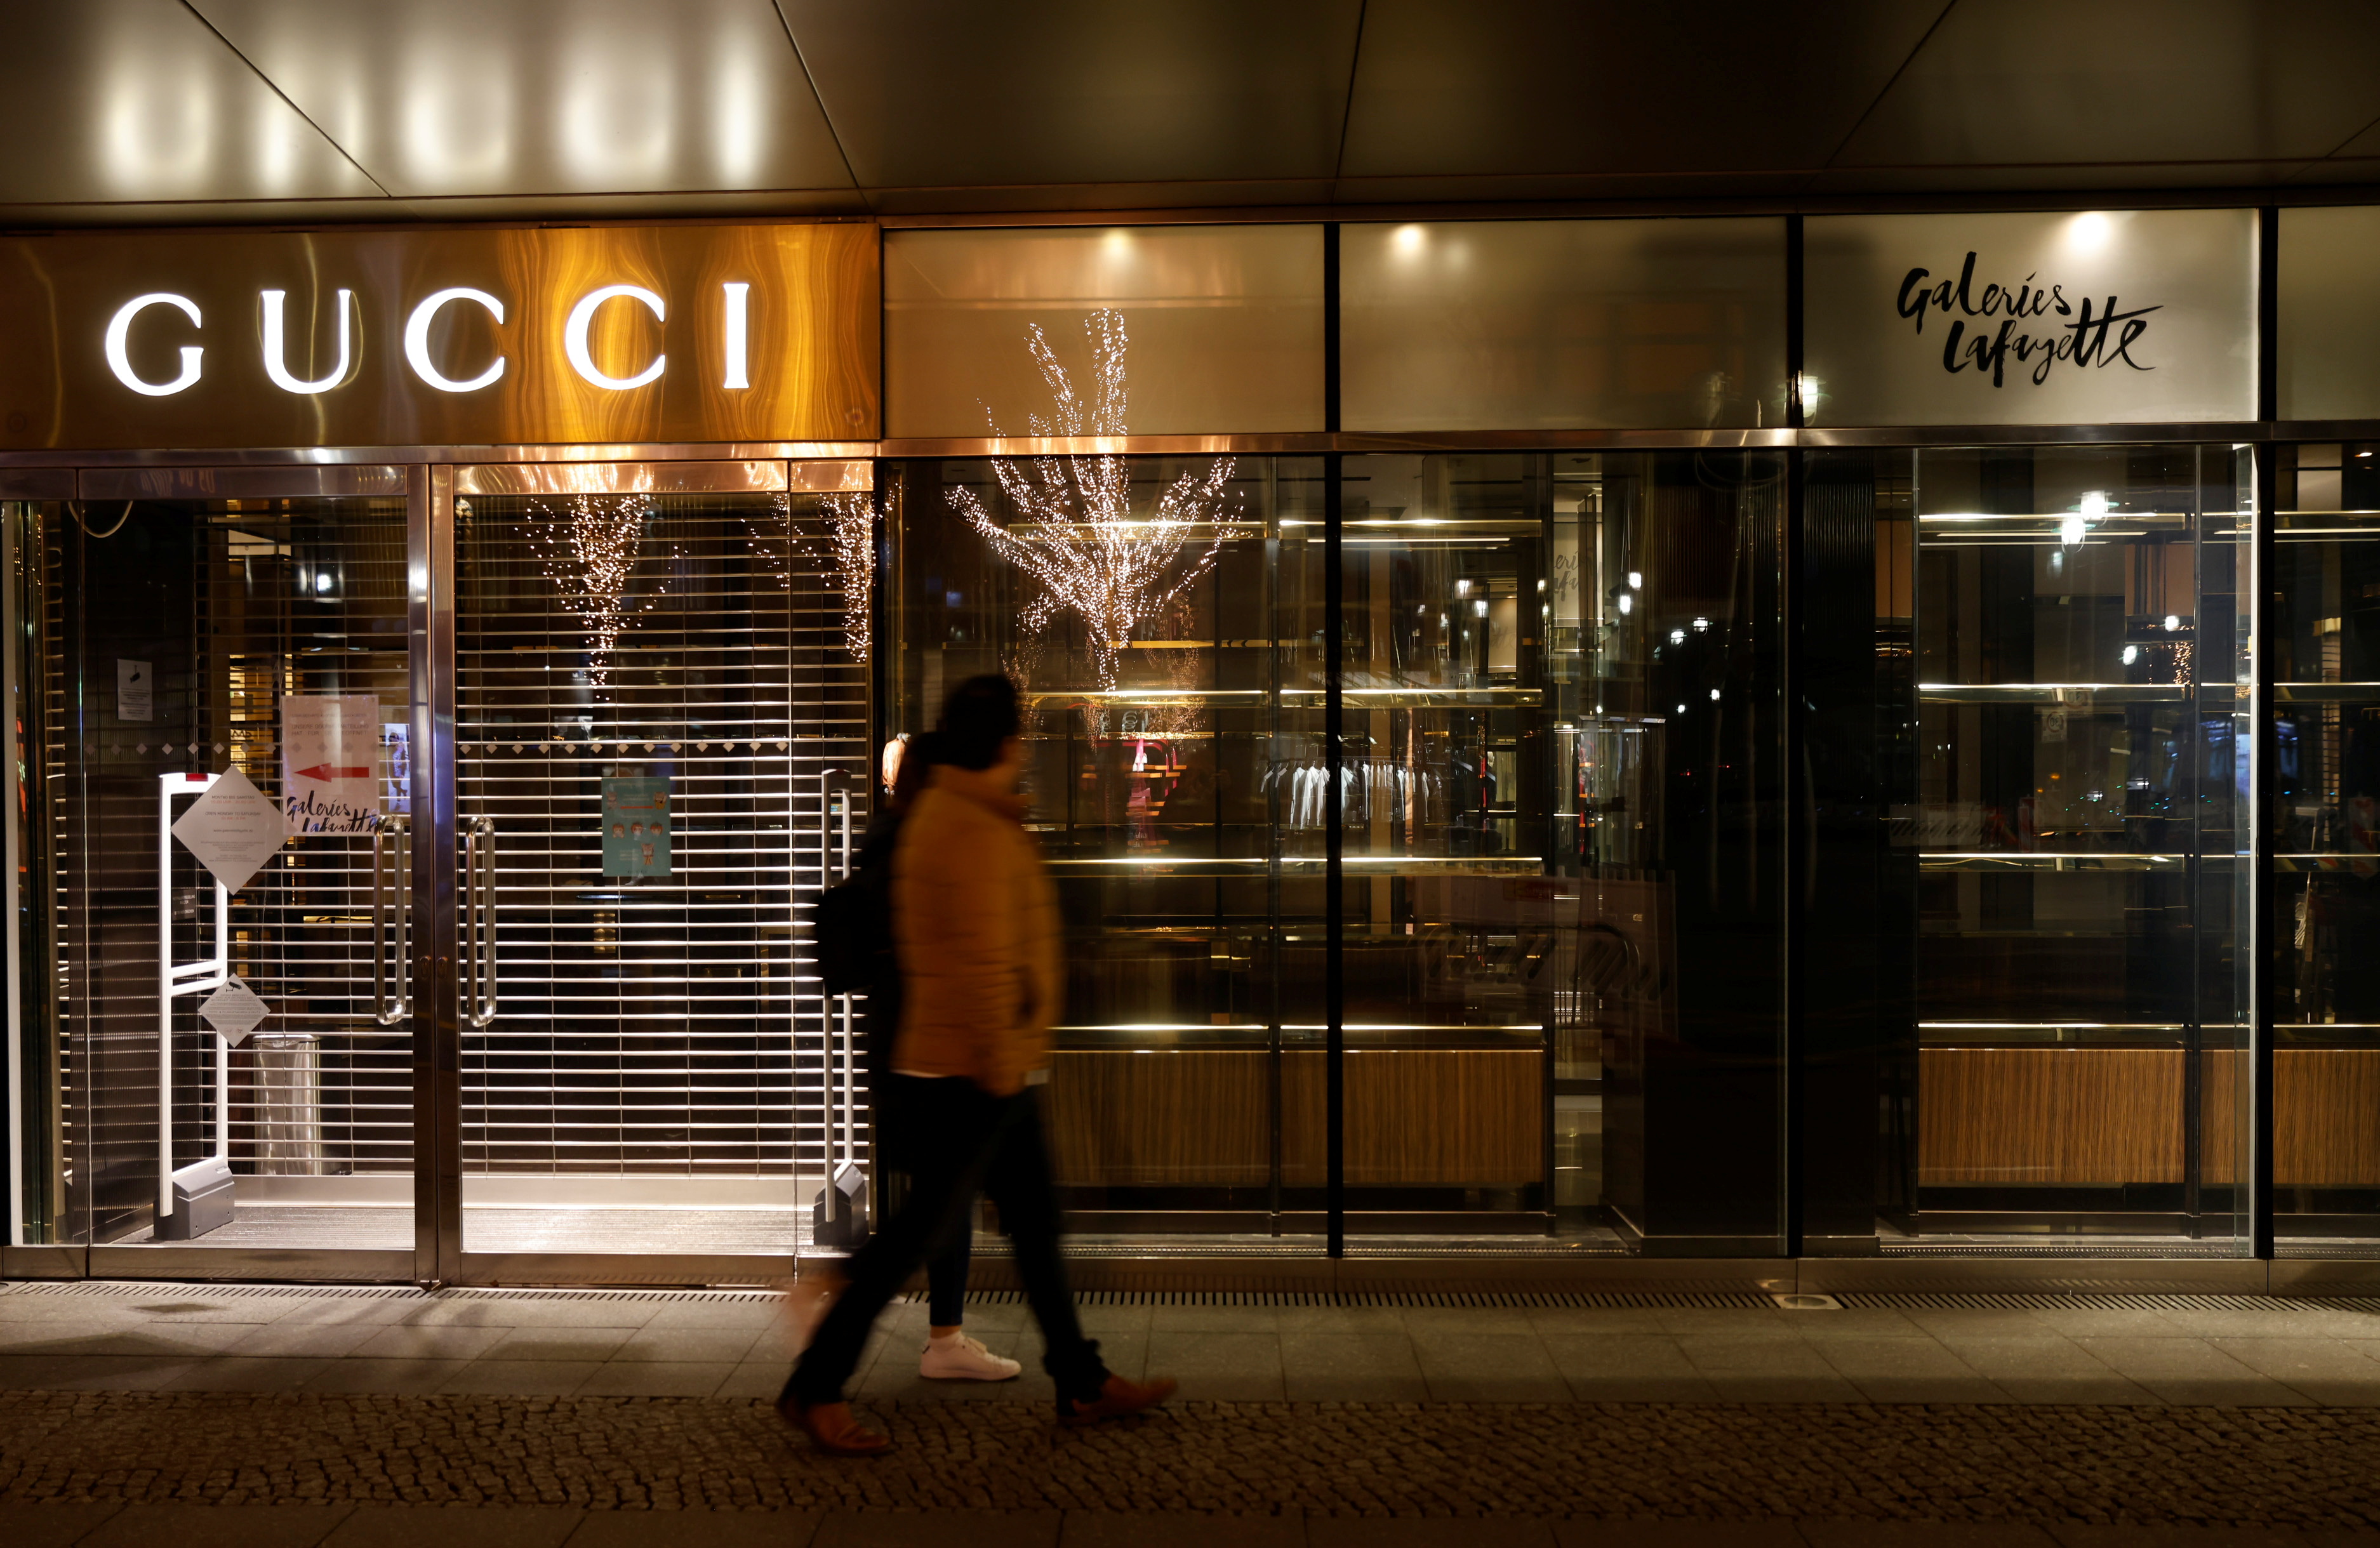 Gucci held an Exclusive Live Broadcast for the Opening of their